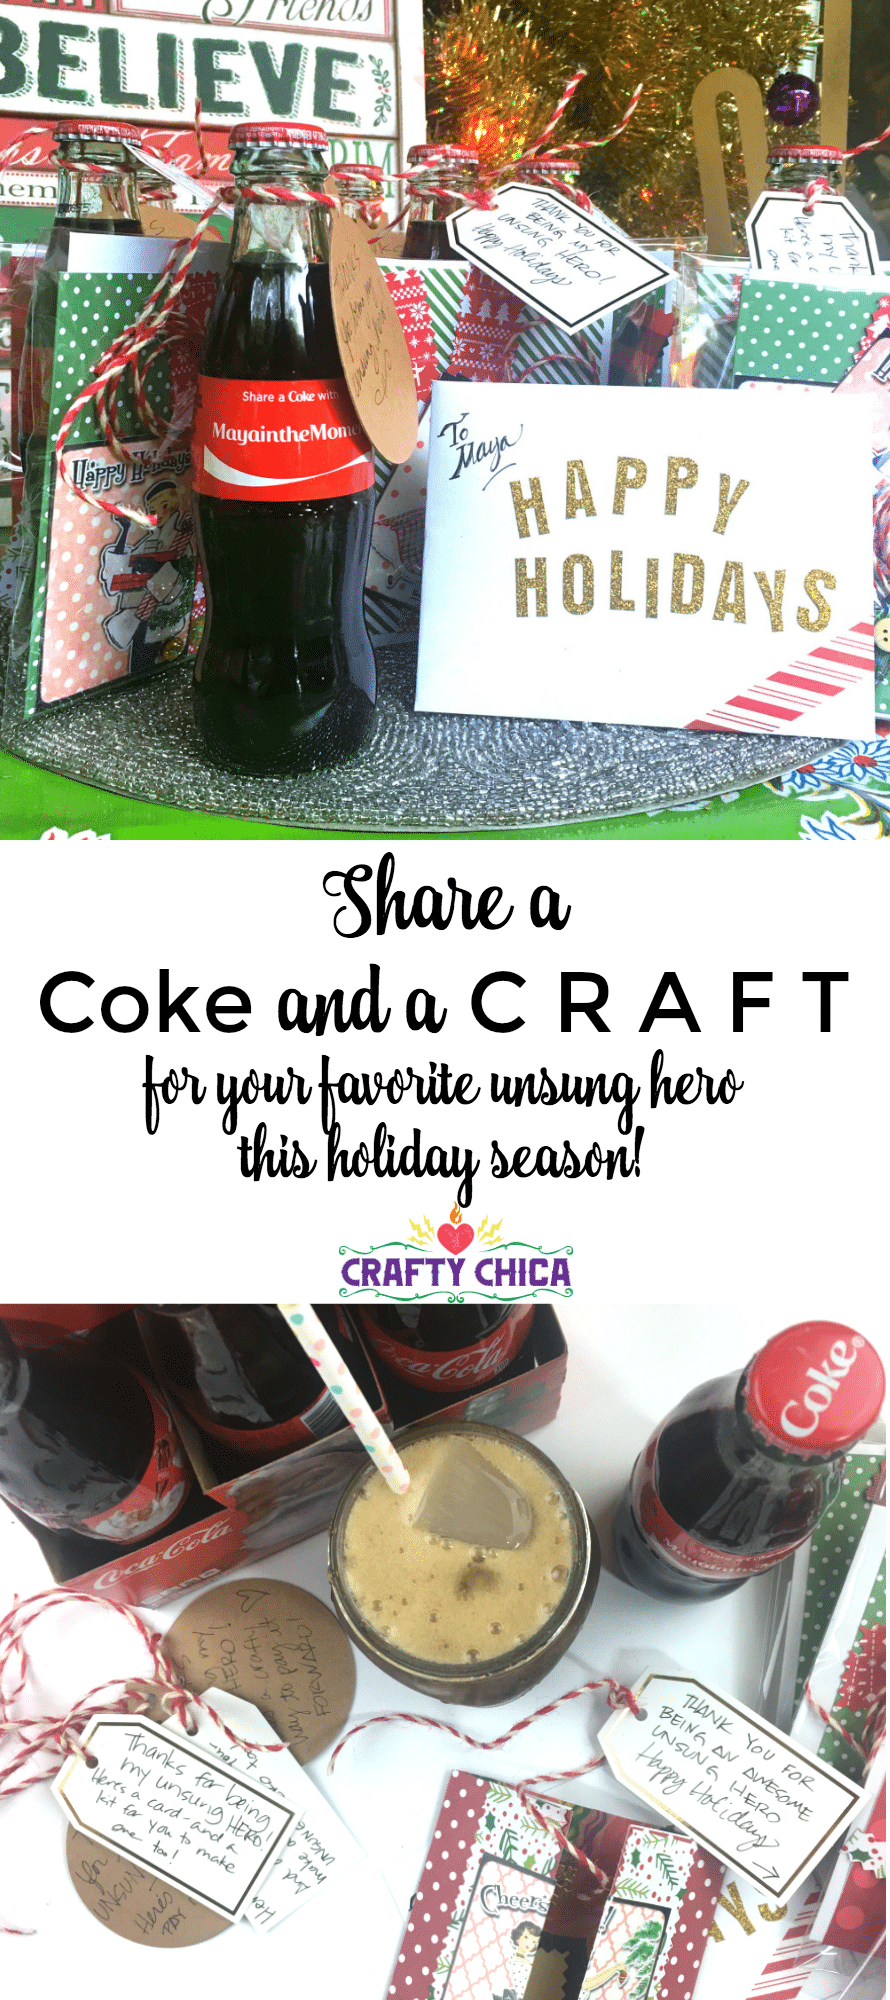 Share a Coke and a craft this season, By CraftyChica.com